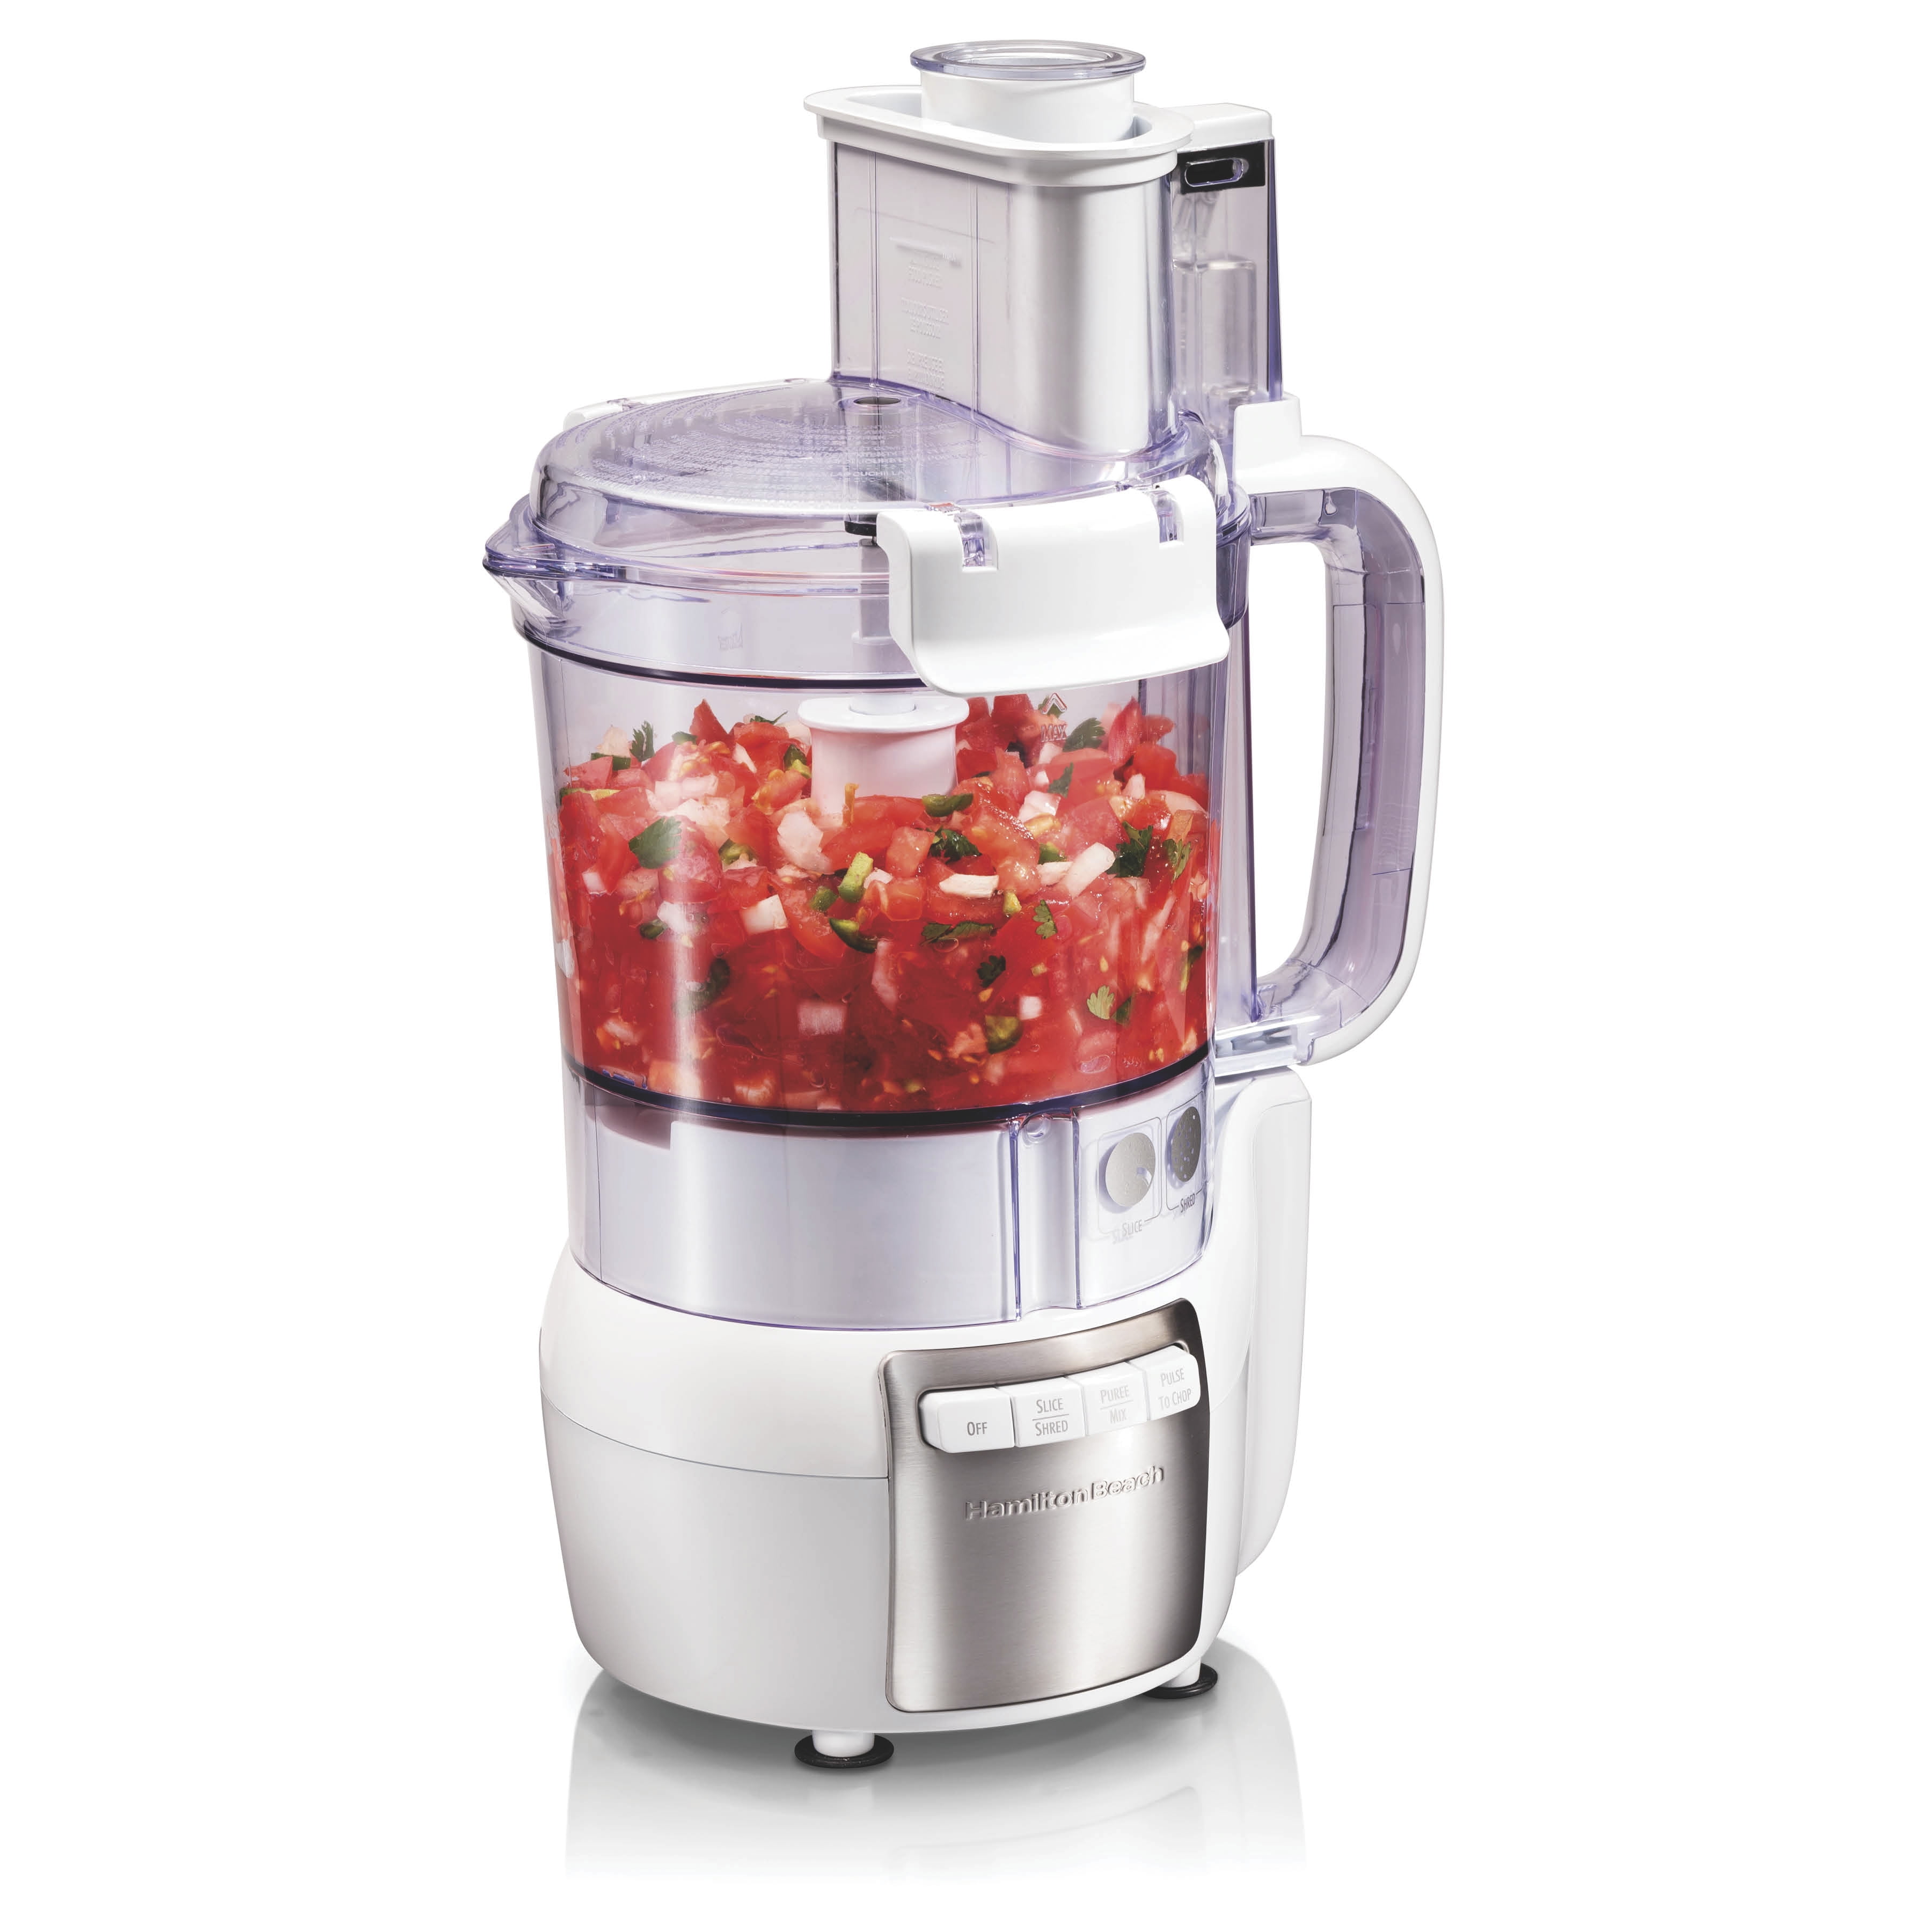  Hamilton Beach Stack & Snap Food Processor and Vegetable Chopper,  BPA Free, Stainless Steel Blades, 12 Cup Bowl, 2-Speed 450 Watt Motor,  Black (70725A): Home & Kitchen